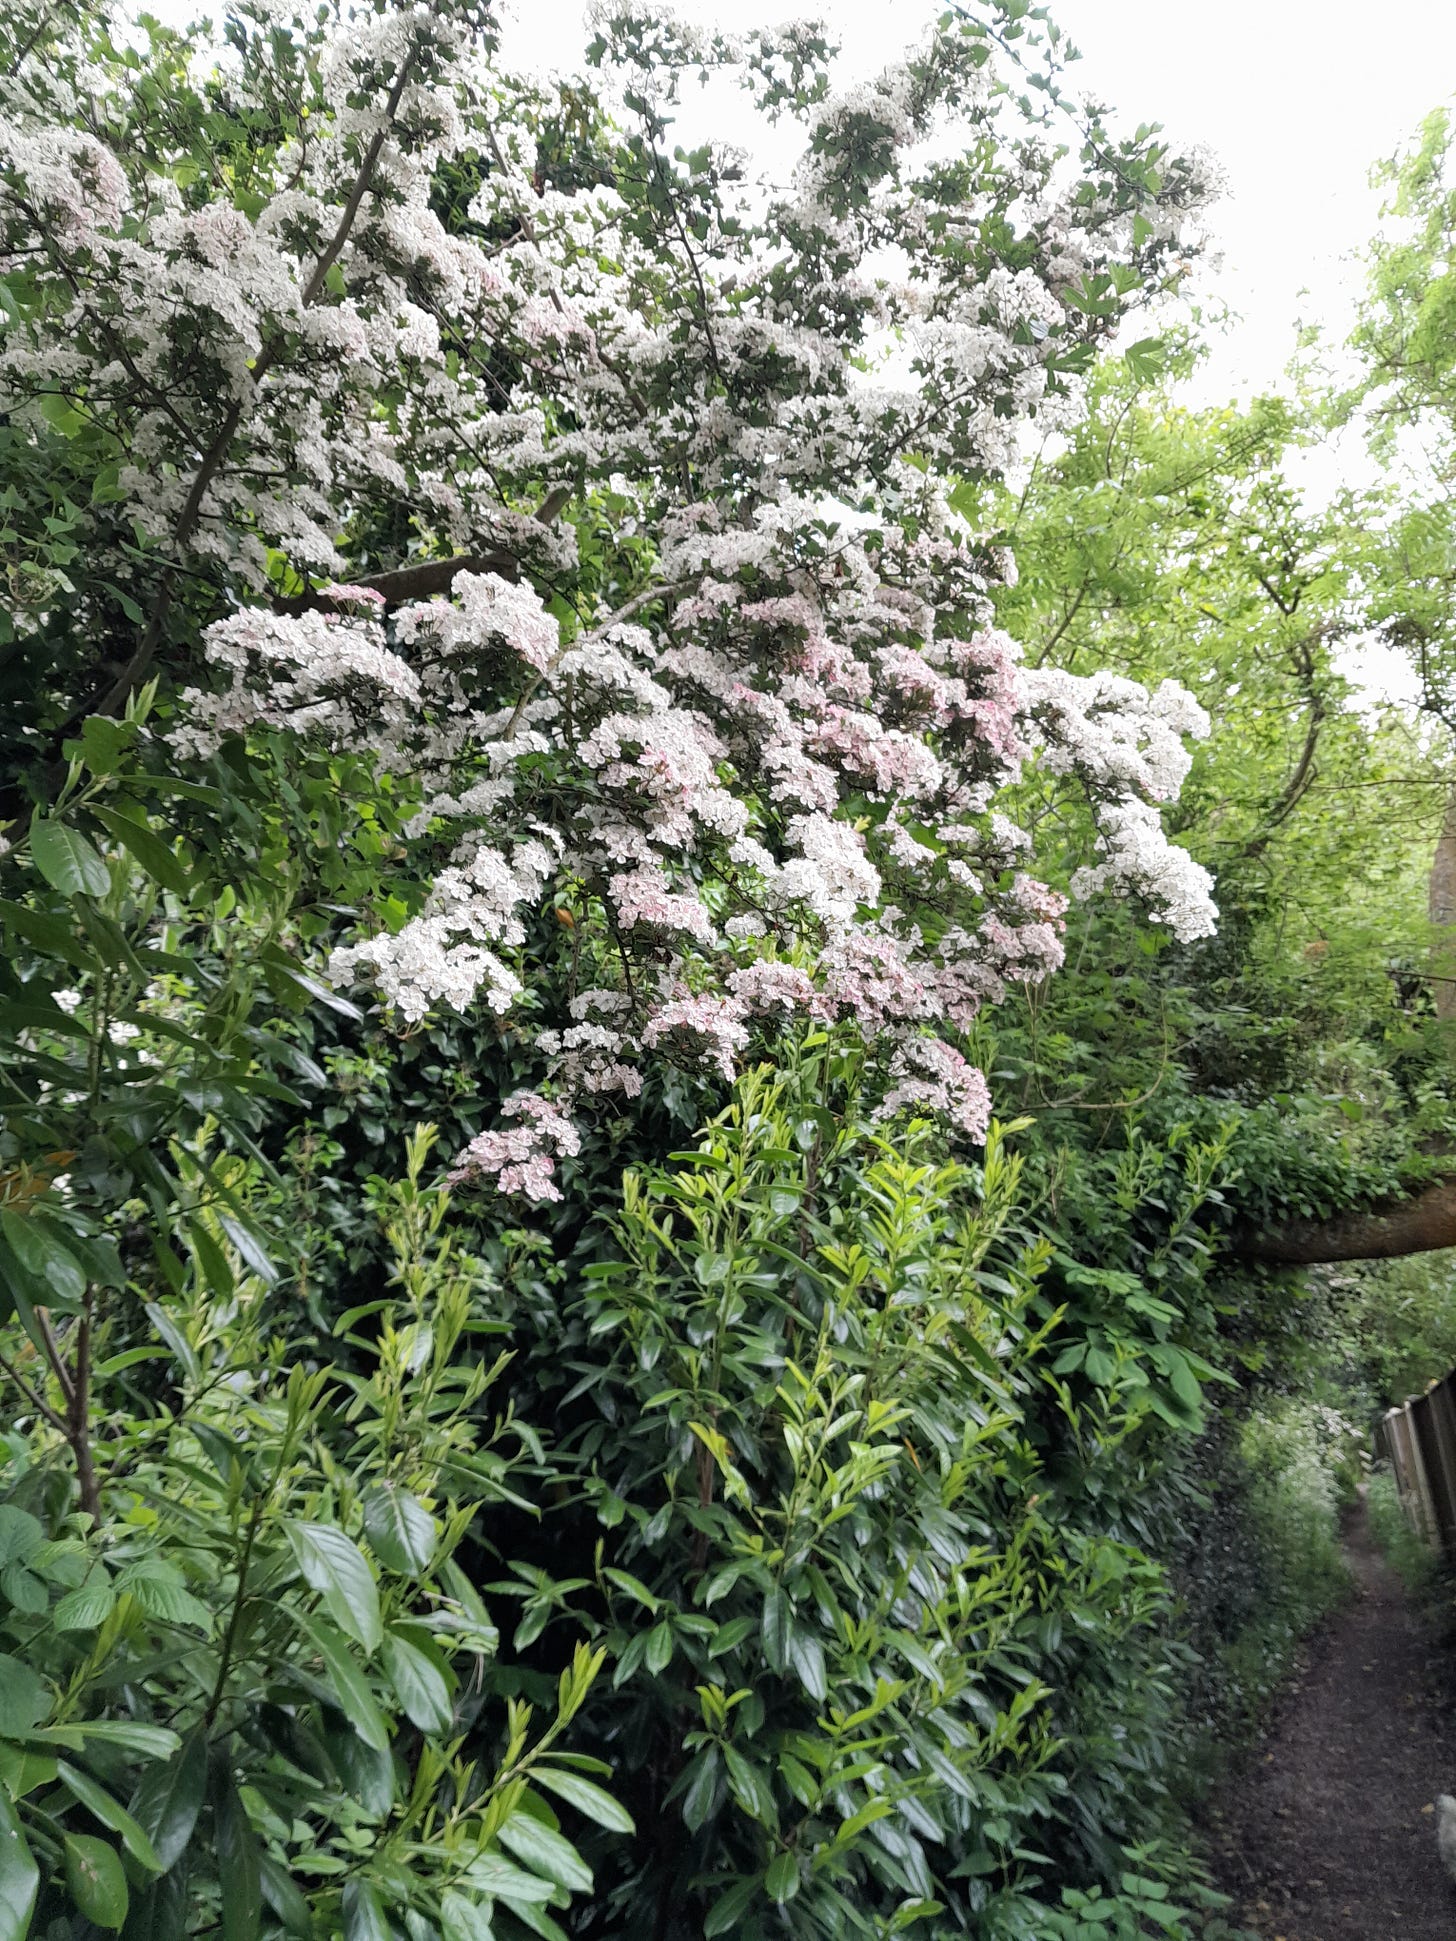 Hawthorn blossom in the foreground. A footpath runs below a horizontal branch, wide as a treetrunk, that forms a doorway